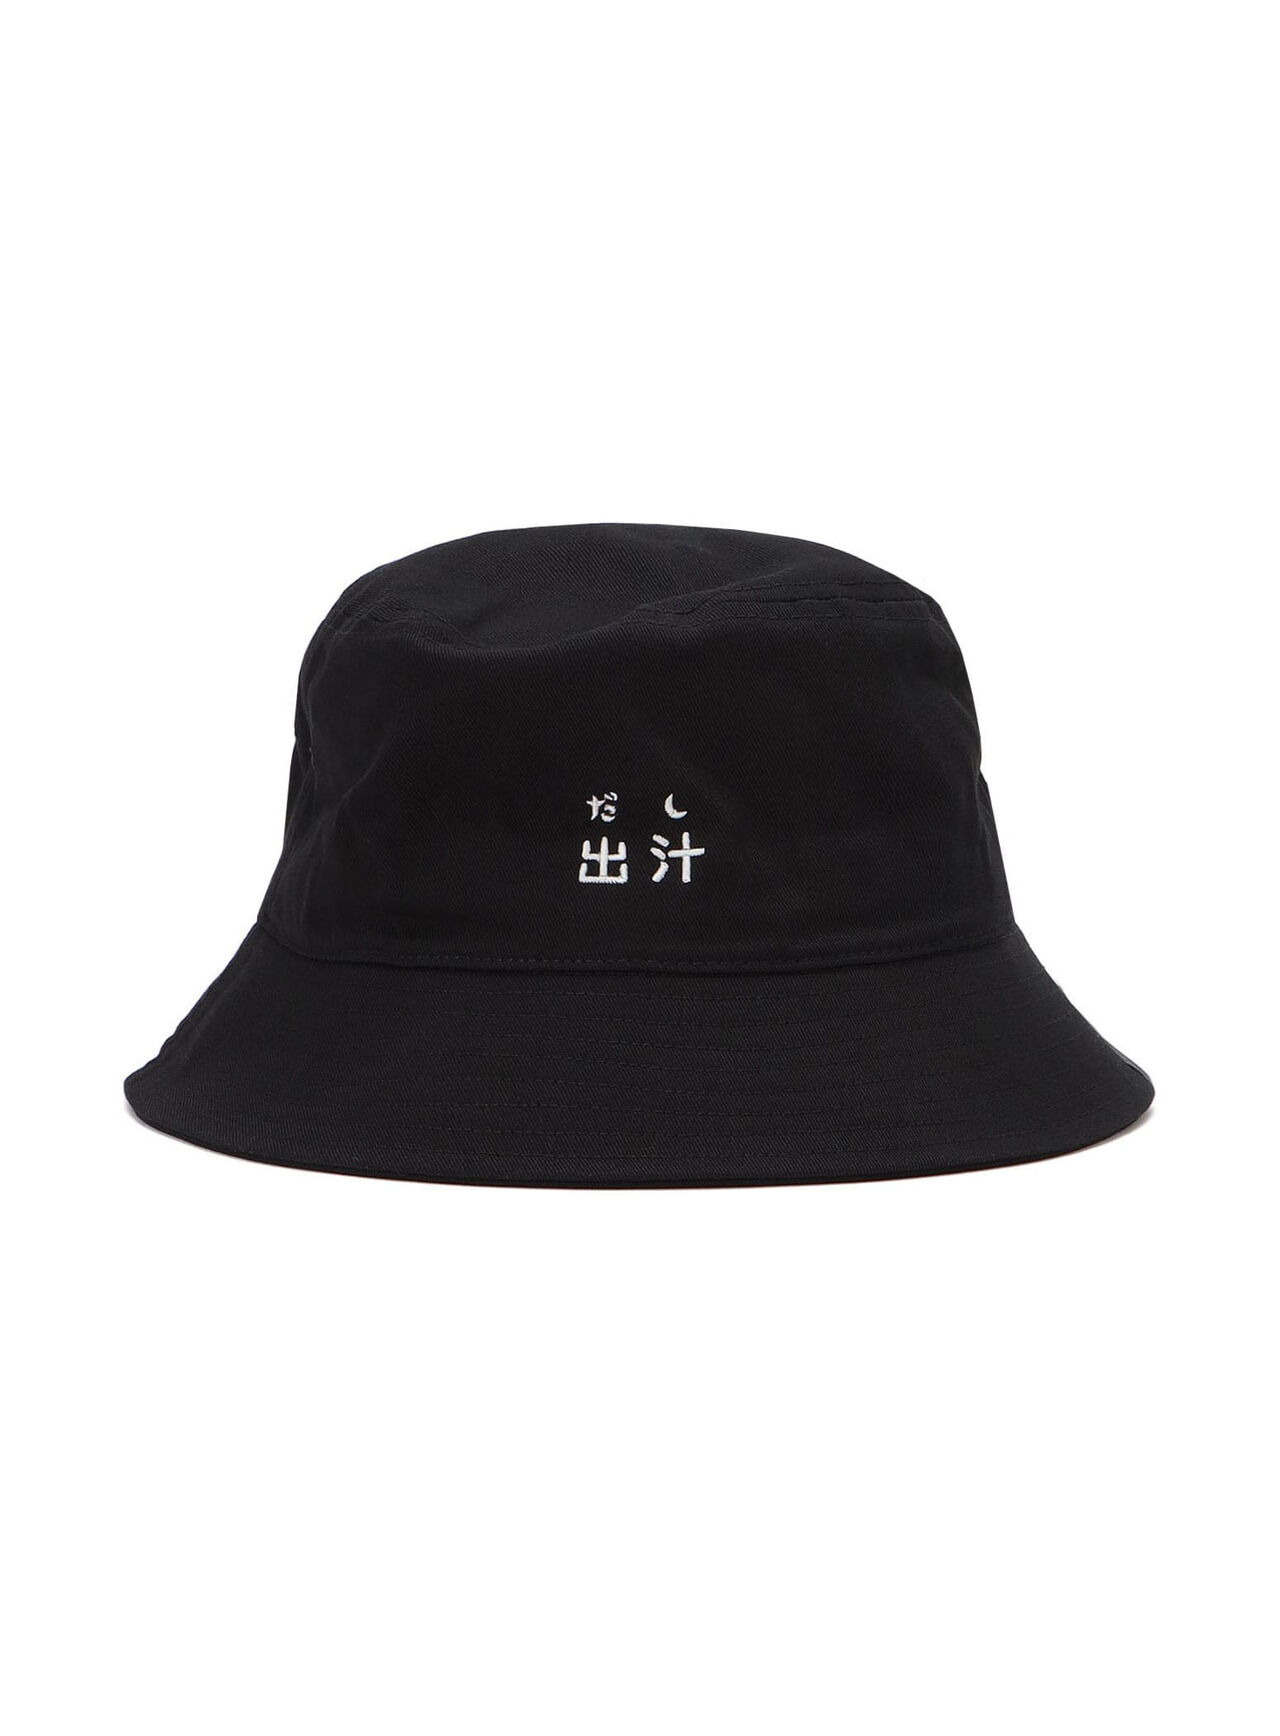 Embroidered Bucket Hat Dashi,ONE, large image number 0